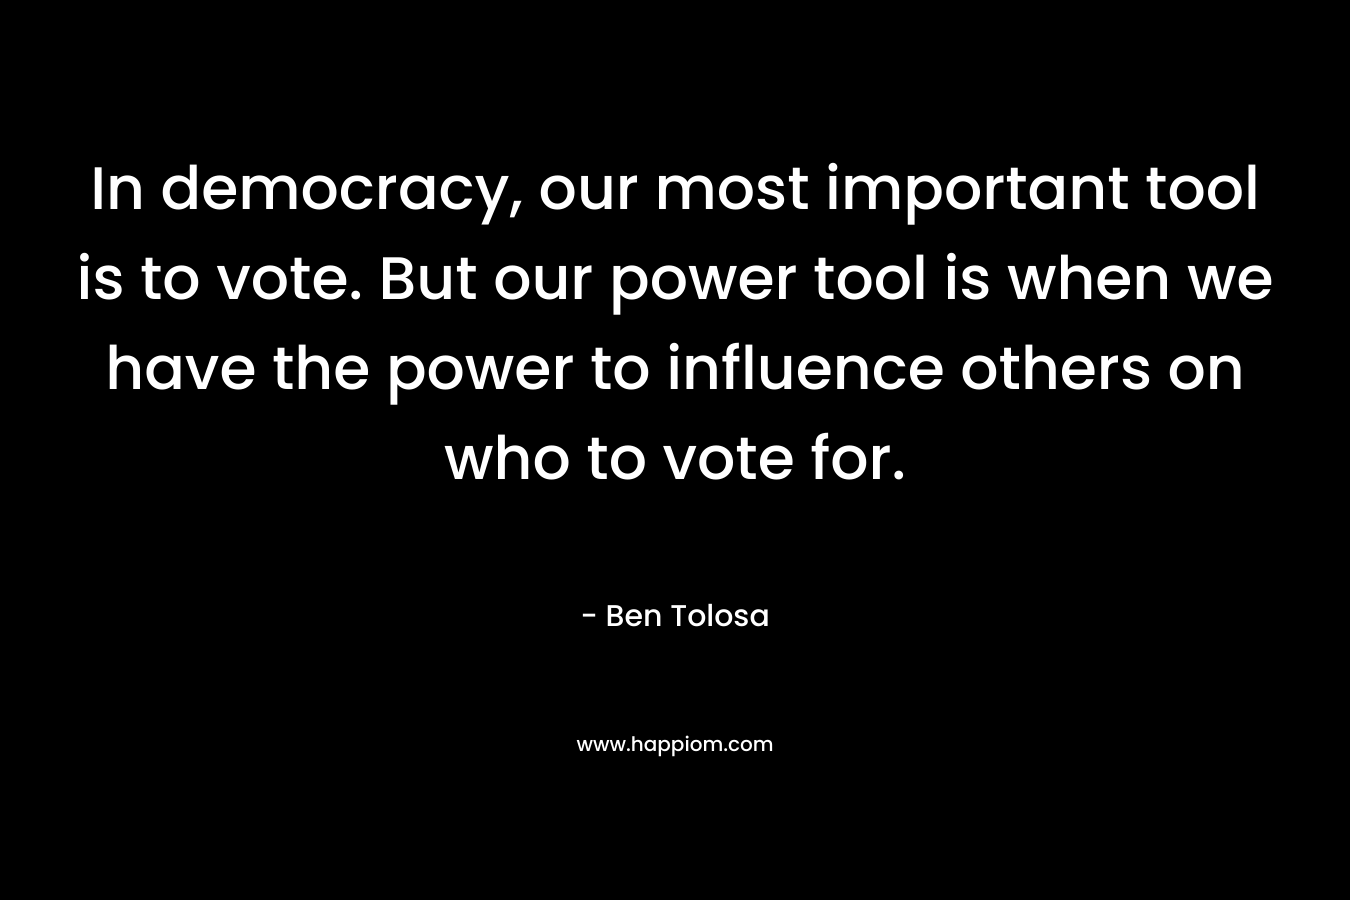 In democracy, our most important tool is to vote. But our power tool is when we have the power to influence others on who to vote for.